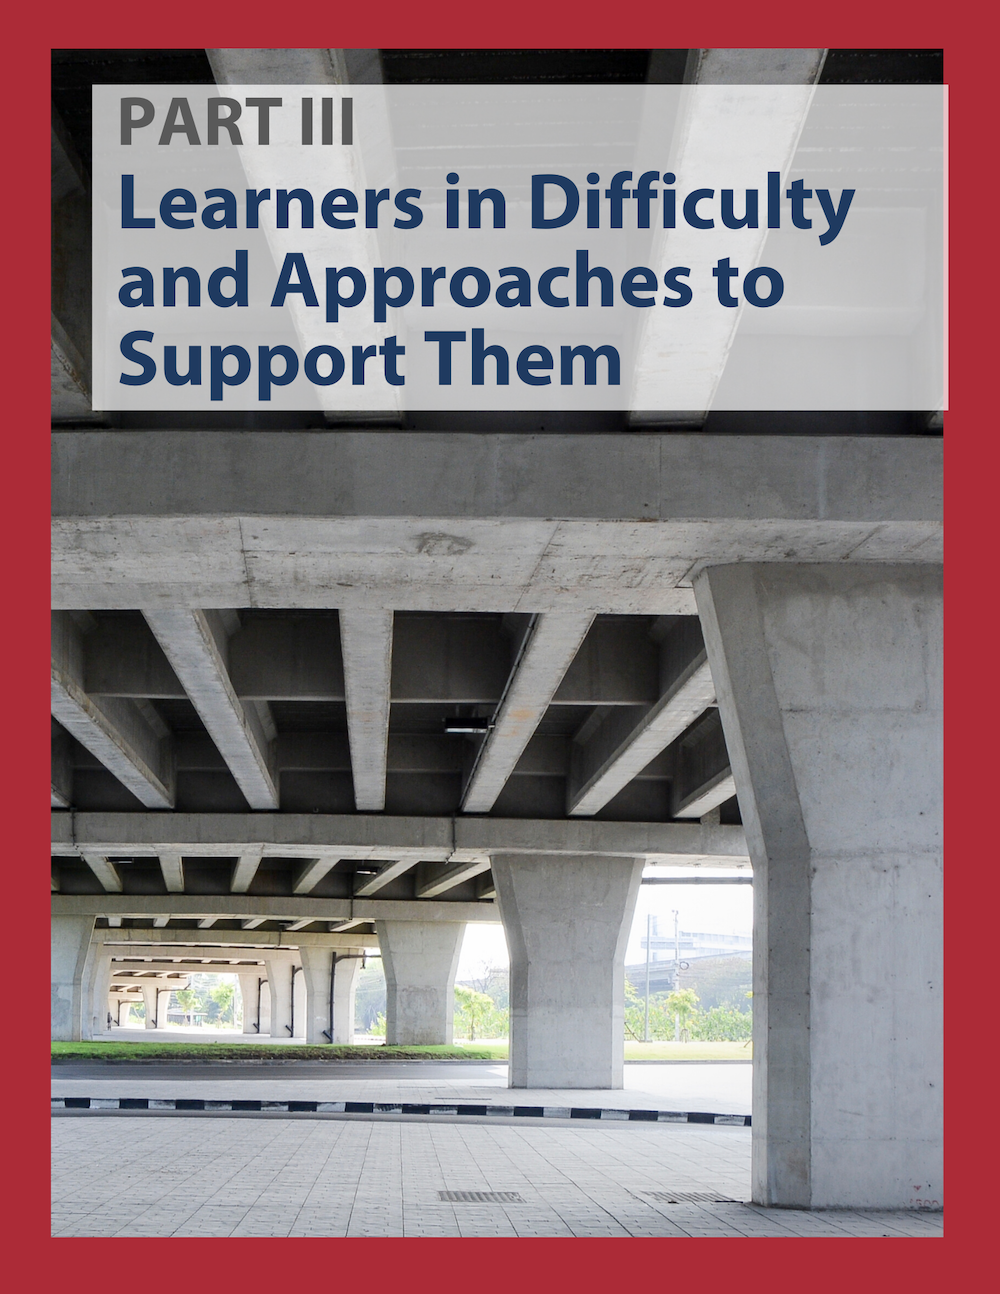 Link to a PDF  - Part 3: Learners in Difficulty and Approaches to Support Them